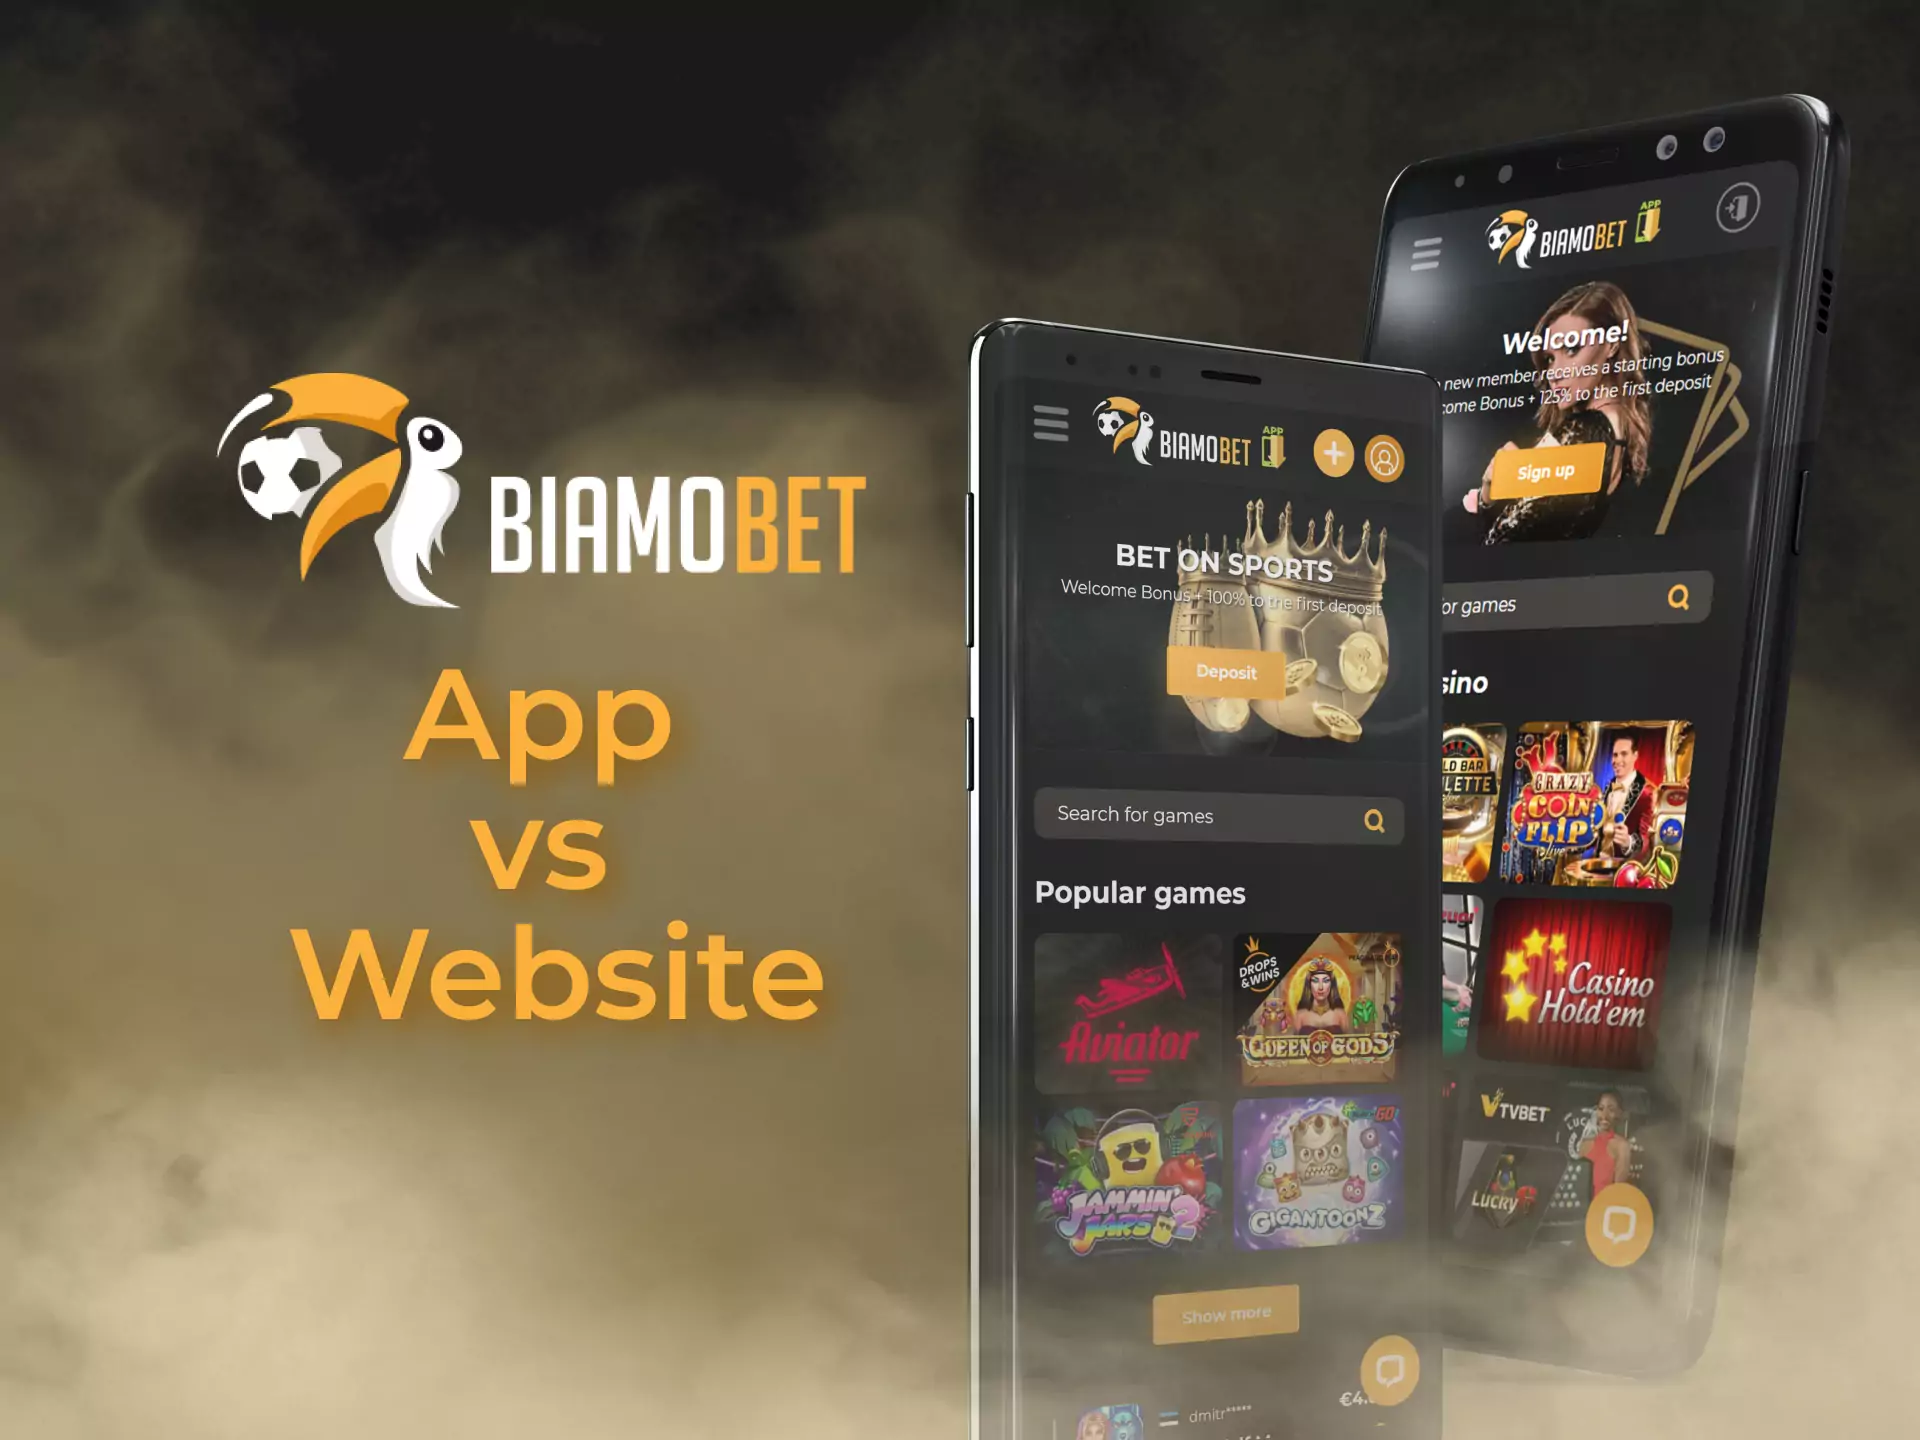 Both the Biamobet app and the Biamobet website have great features and provide perfect betting services.